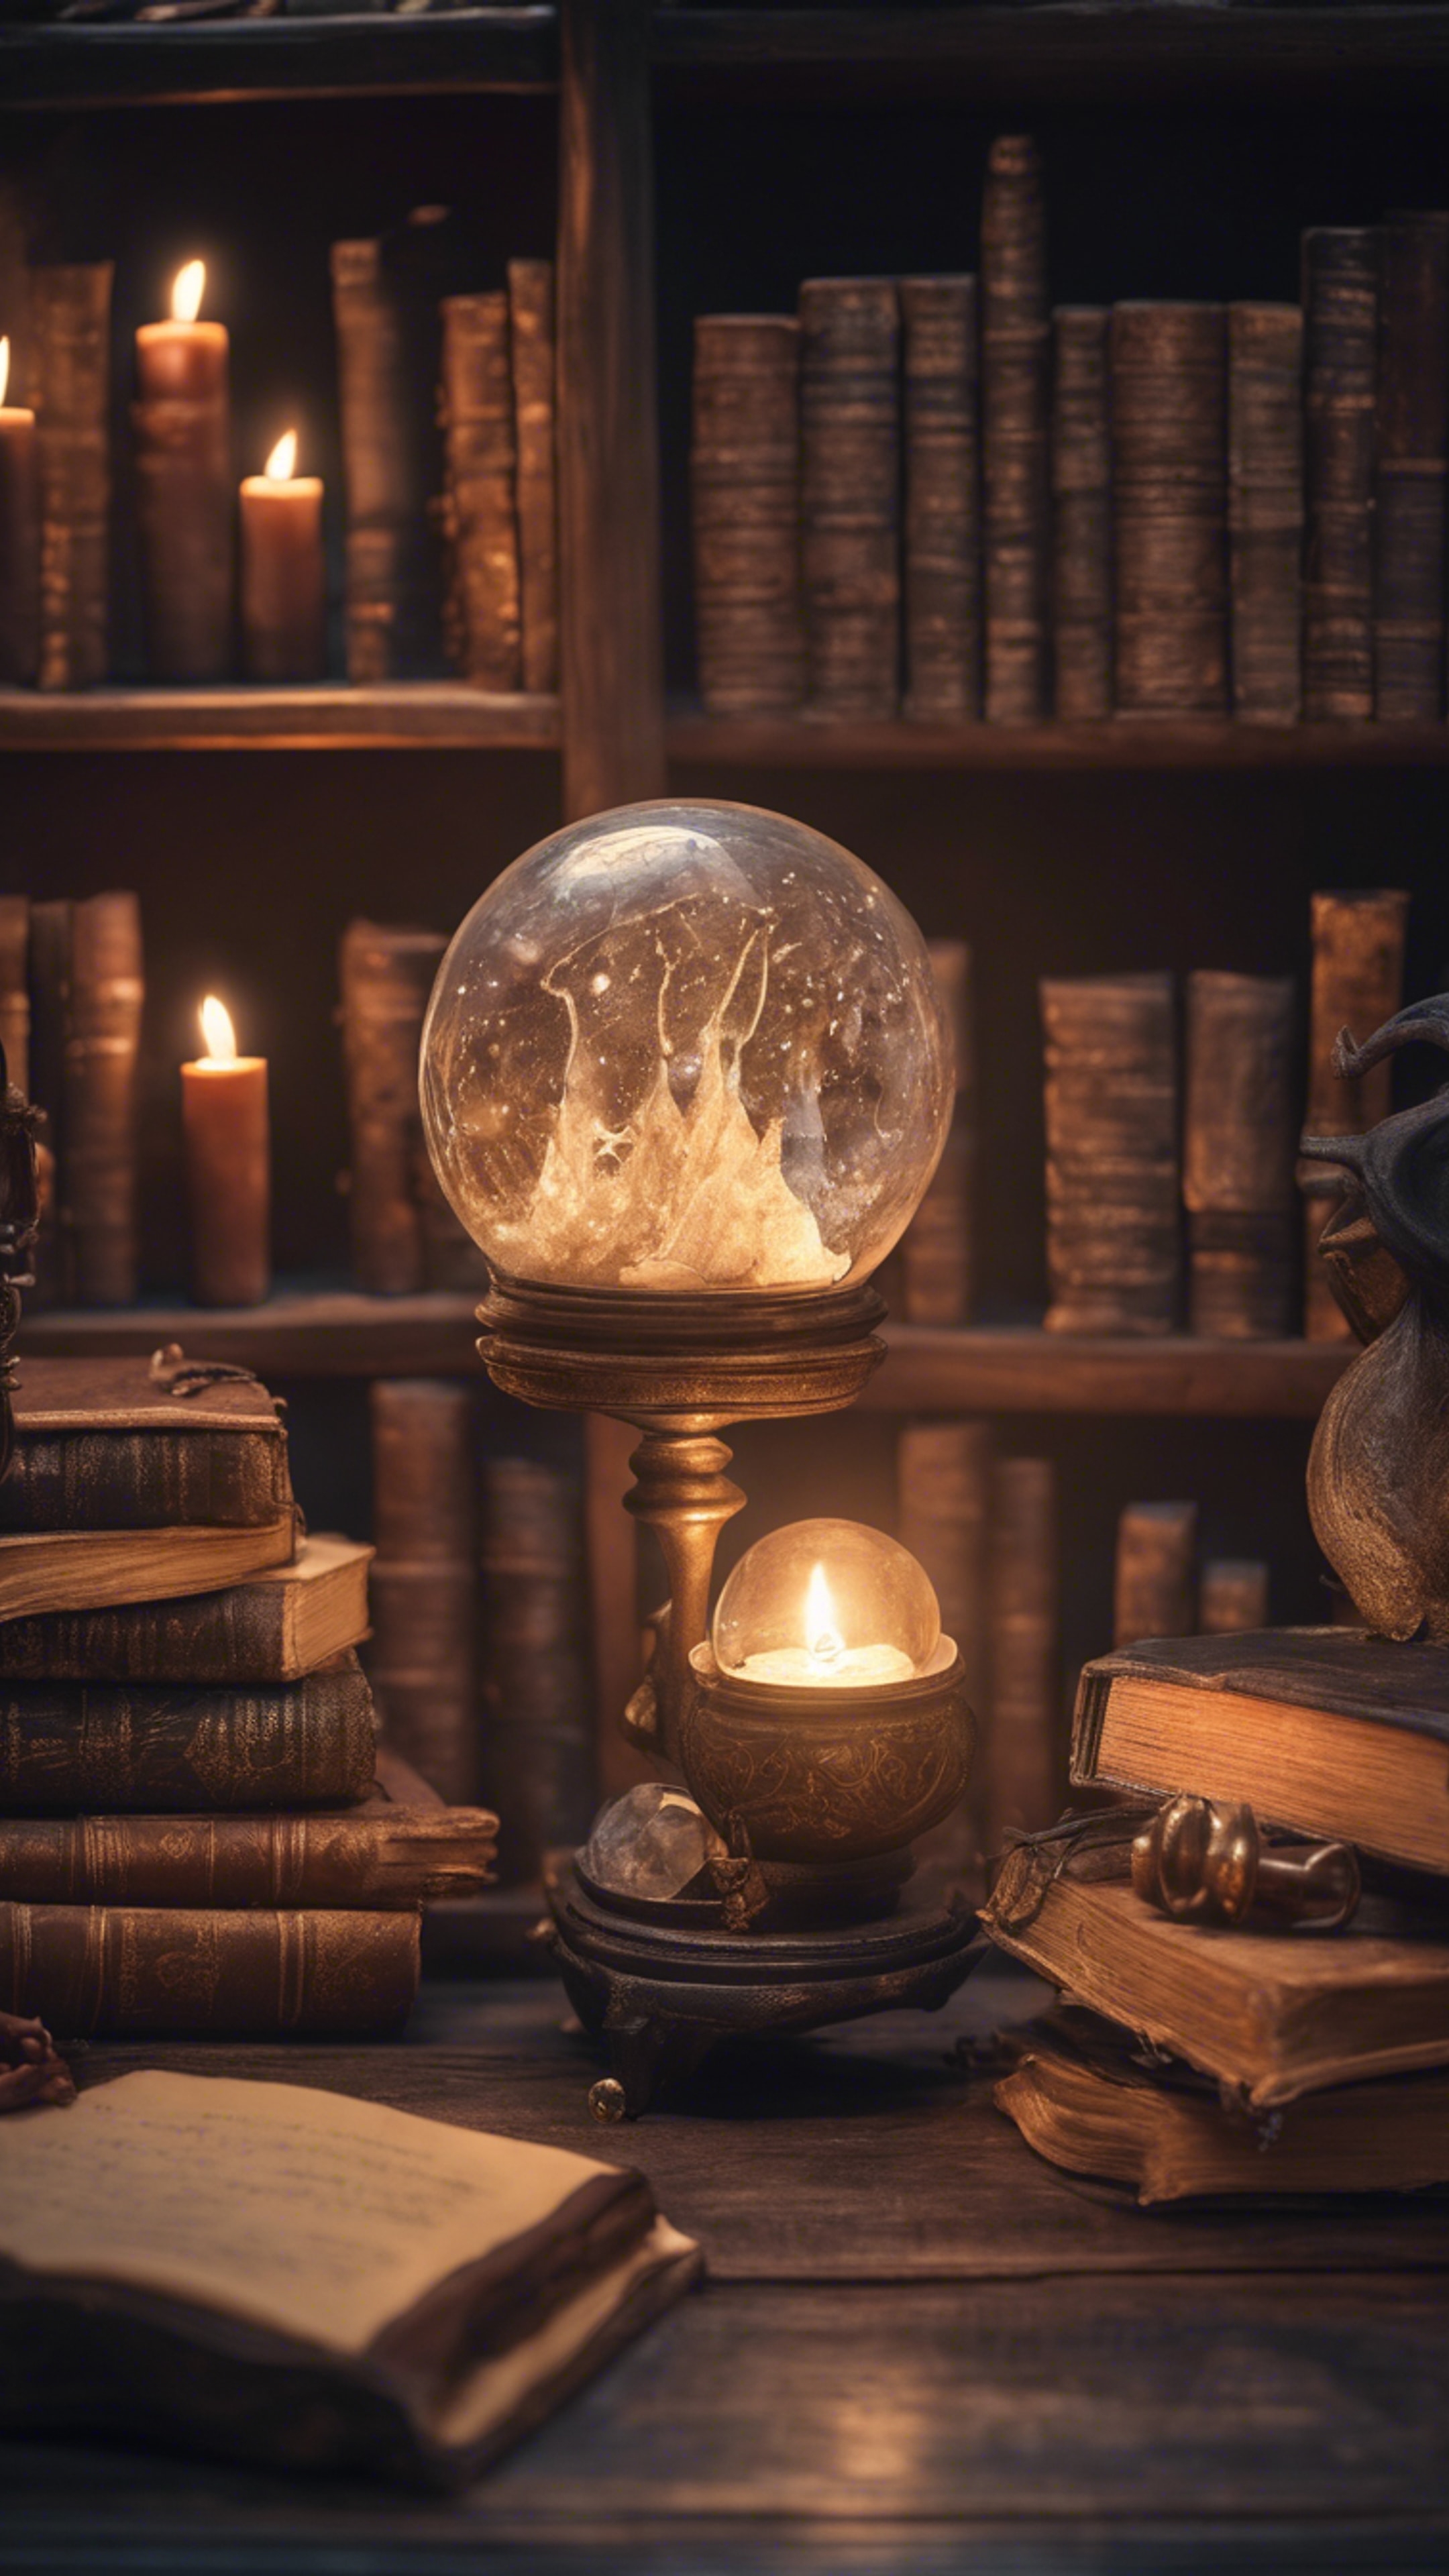 A cozy mystical scene with a wizard’s study room - magical artifacts, rows of spell books, a crystal ball, and a cauldron brewing a potion. ផ្ទាំង​រូបភាព[df00e949c5584759a81e]